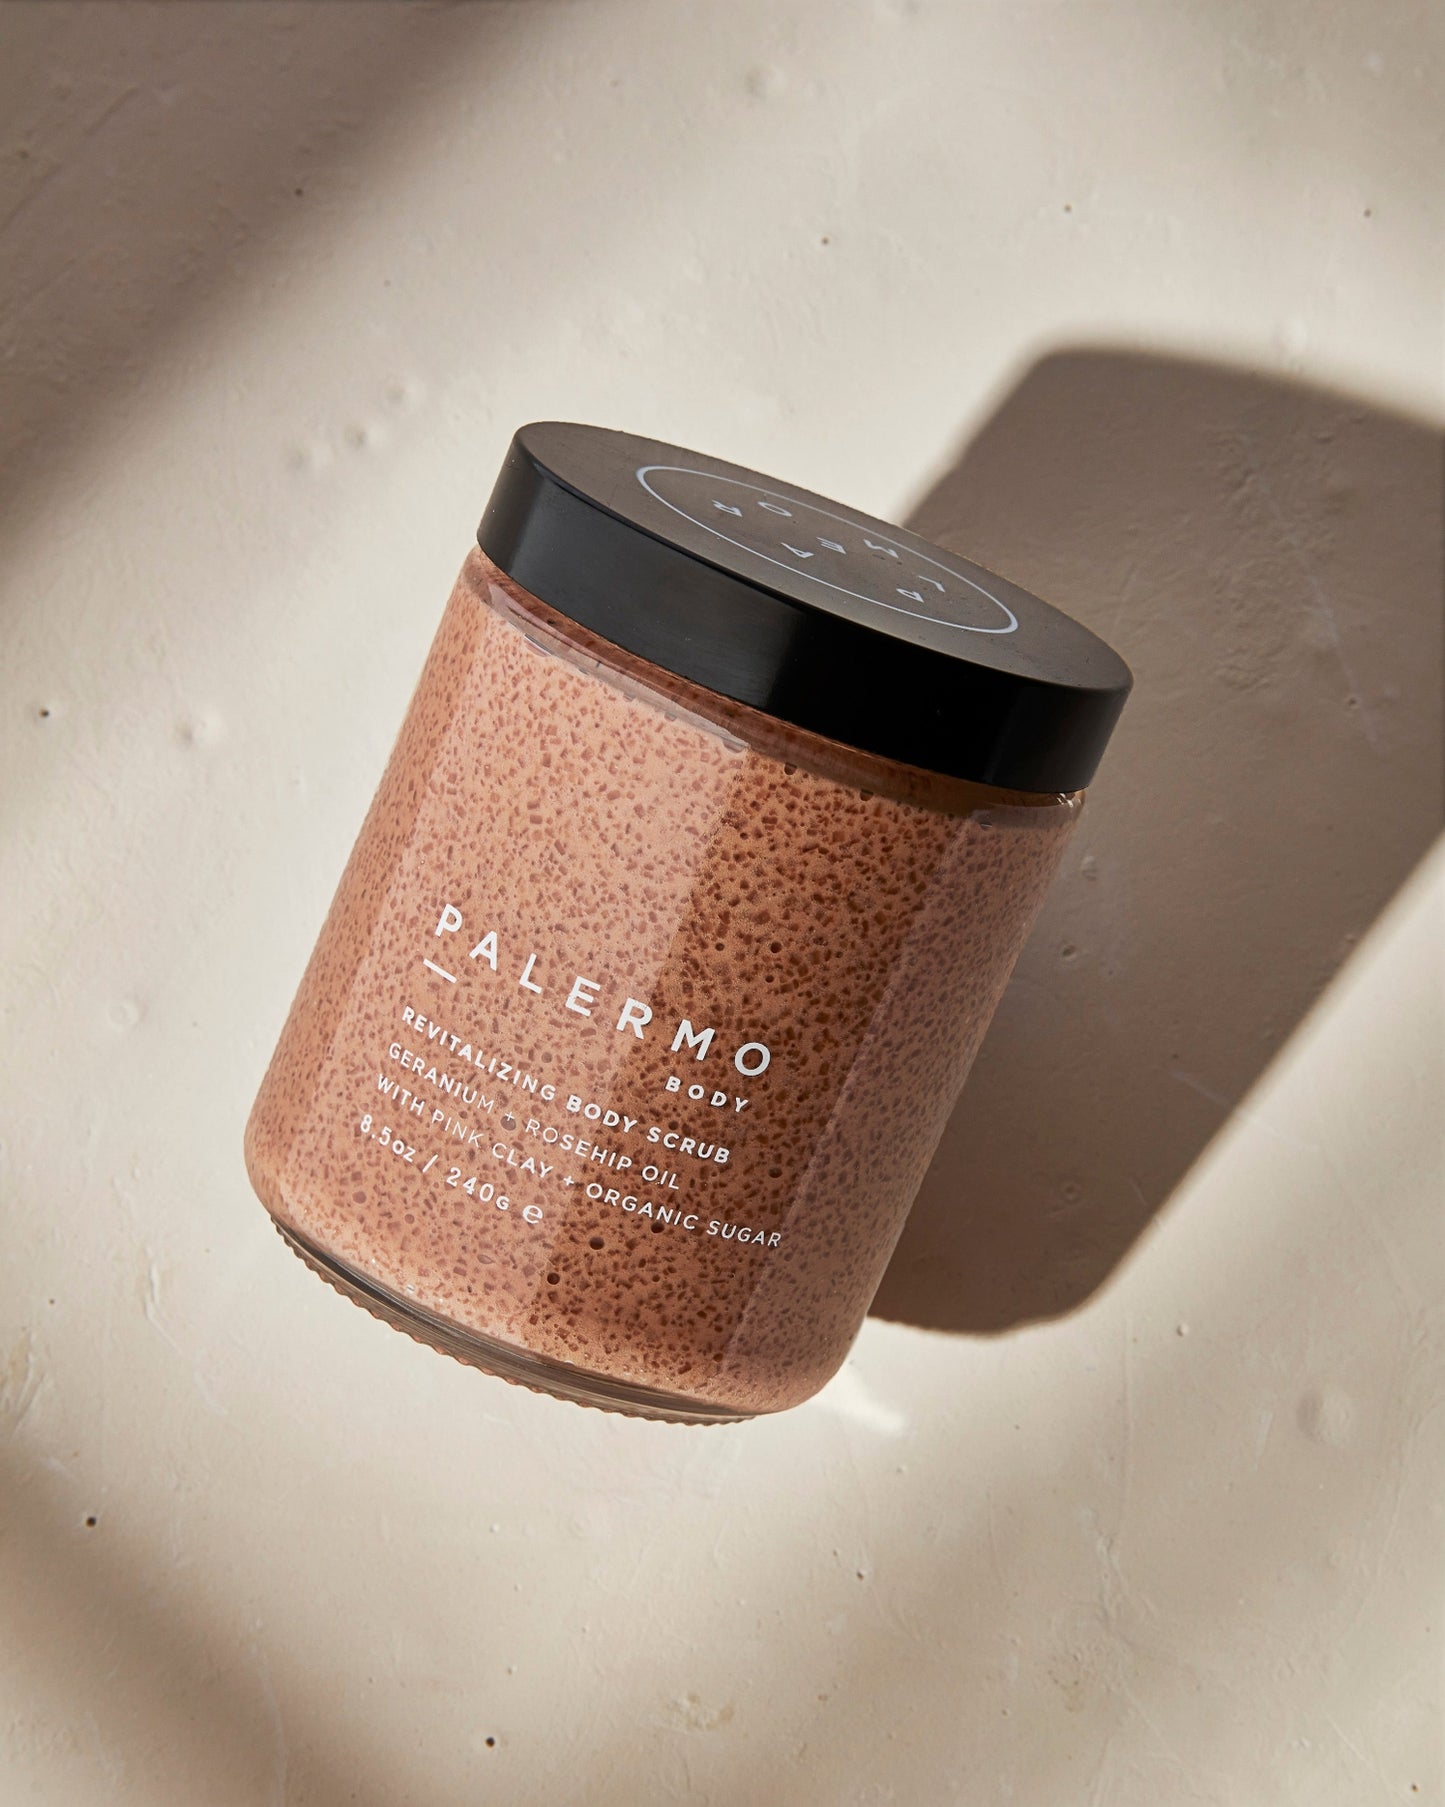 For renewal and reawakening your body, these carefully combined aromatherapeutic properties will refresh and uplift you inside and out. Organic sugar and ground apricot seed provide lush exfoliation, French pink clay restores skin’s radiance, while geranium uplifts the soul and senses.